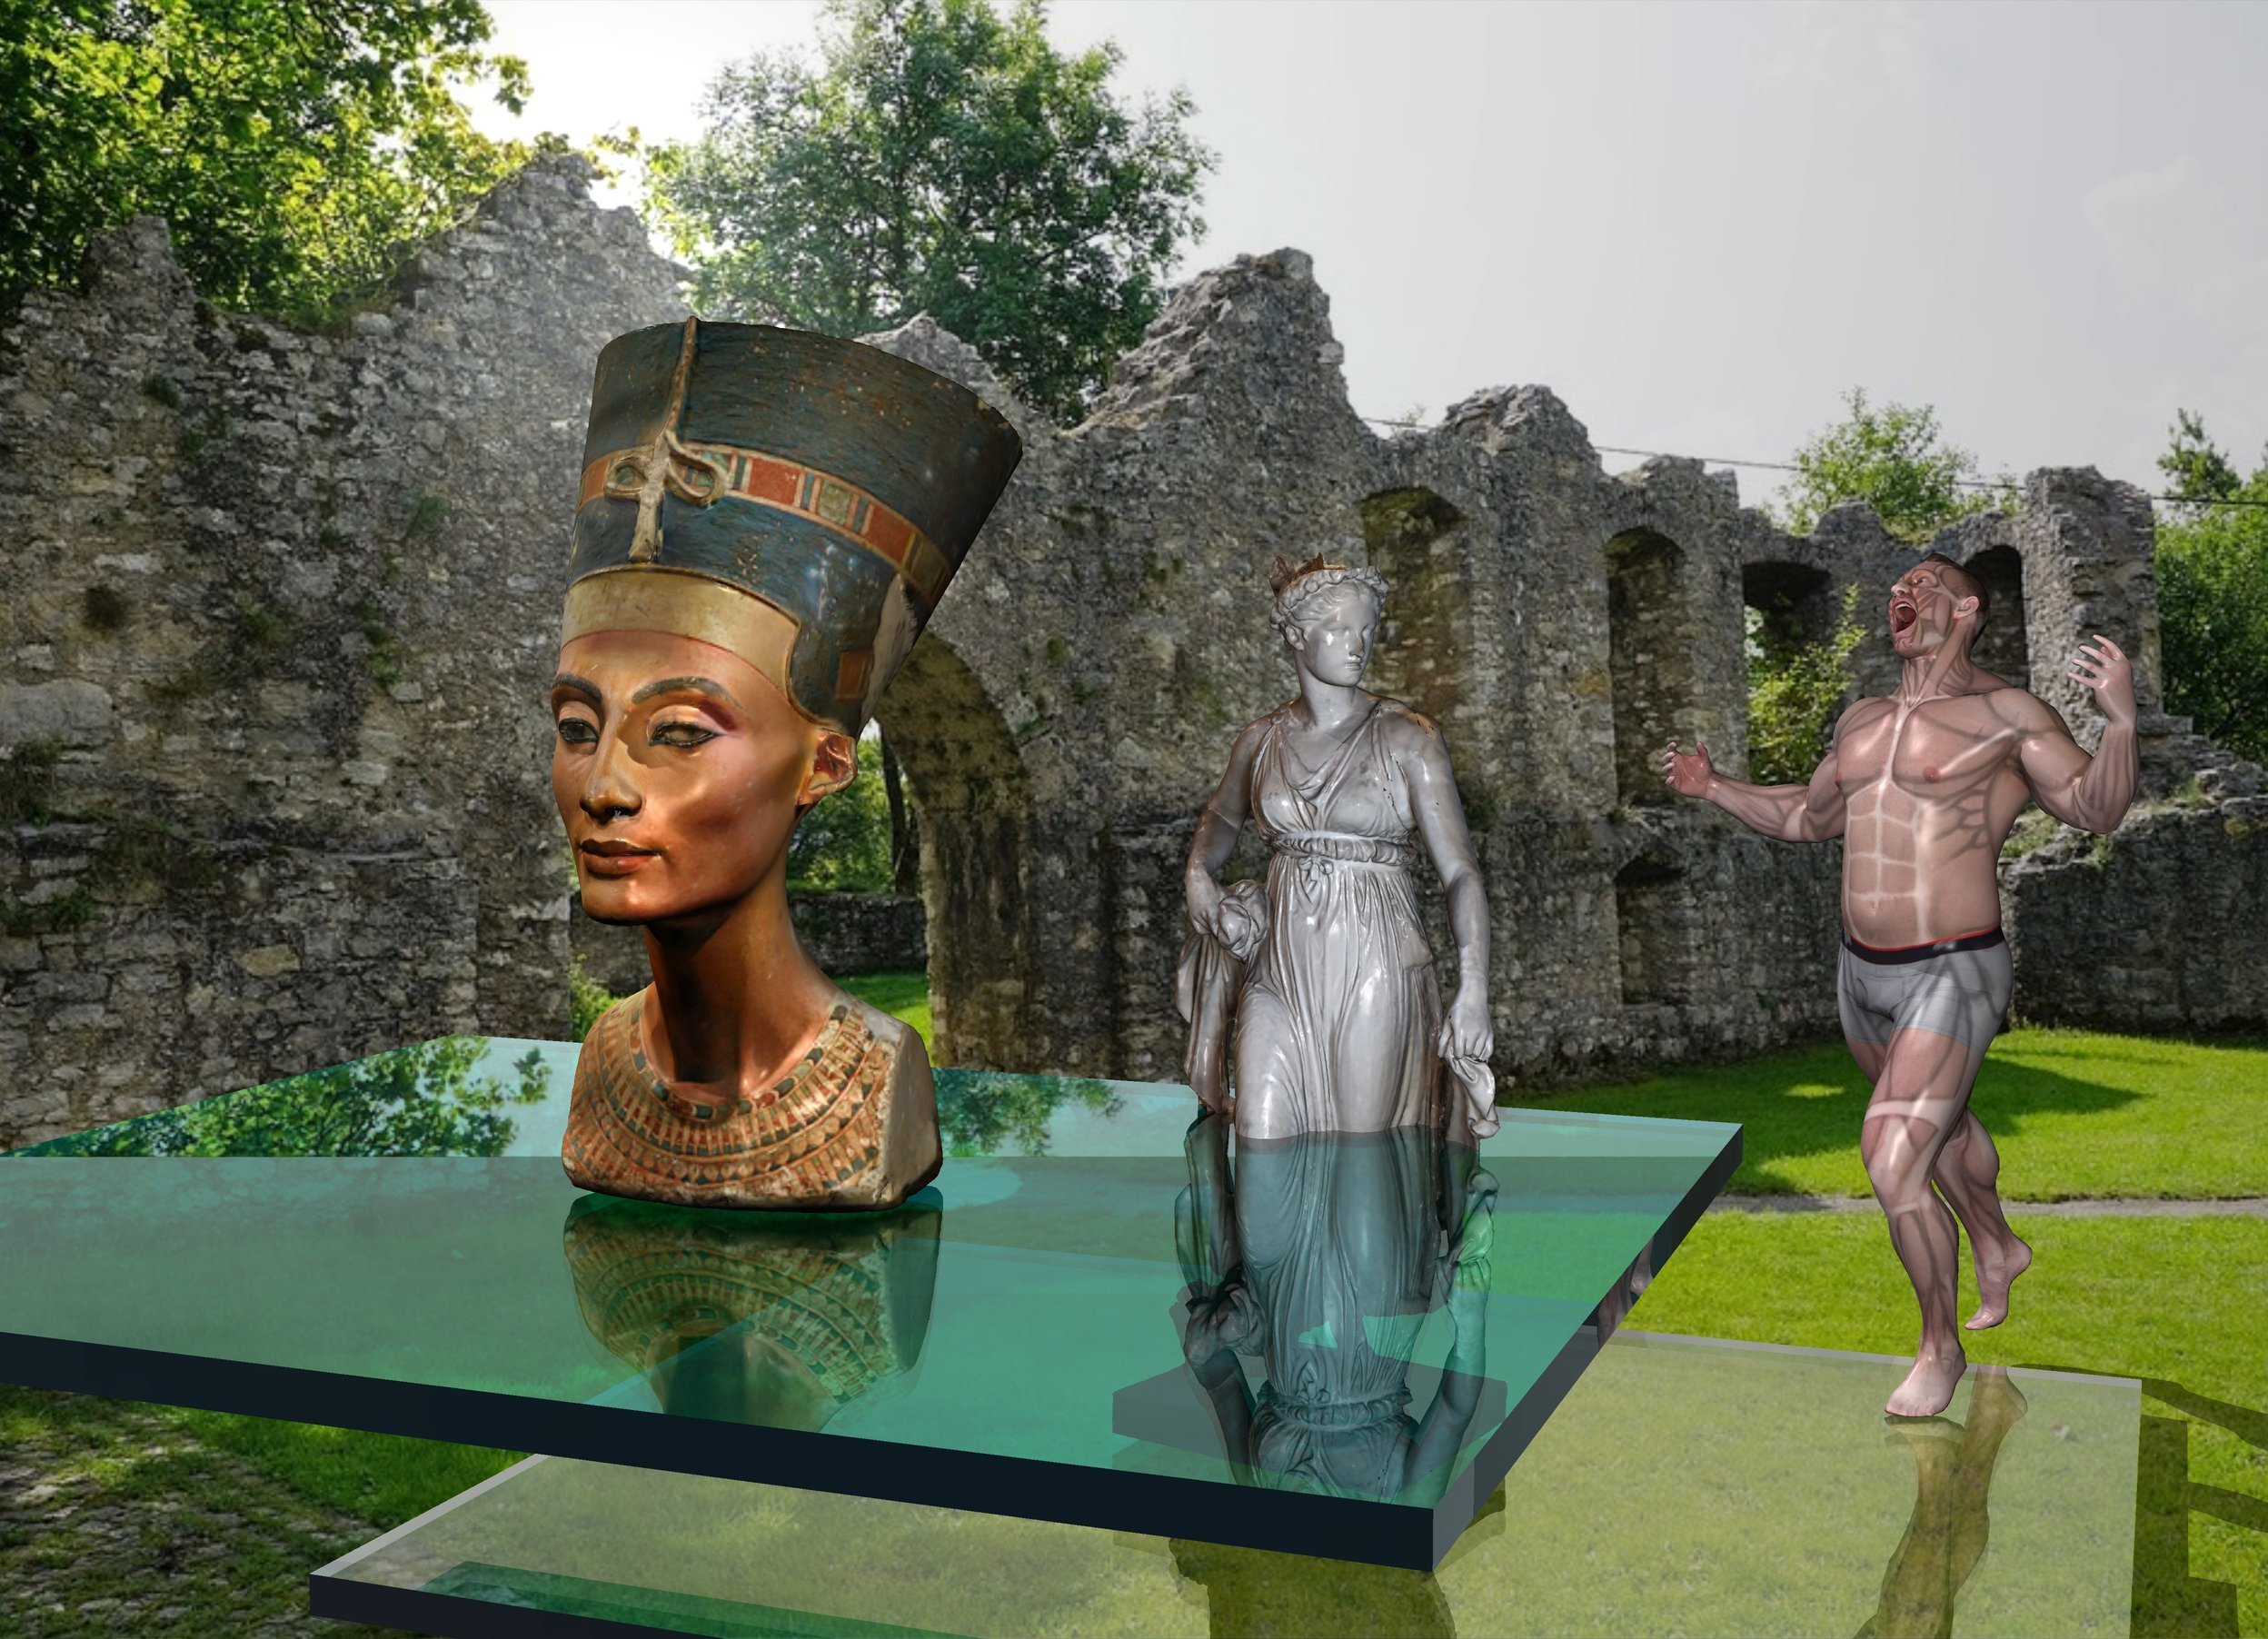 Input text: the 1st statue is on the large glass slab.  the slab is 3 inches tall. 

the large cyan glass slab is 2 feet above the glass slab. it is 3 inches tall. 

the 2nd statue is on the cyan slab. it is 5 feet tall. it is in front of and left of the 1st statue.

the man is behind the glass slab.
he is right of the 1st statue. he is facing the 2nd statue.


